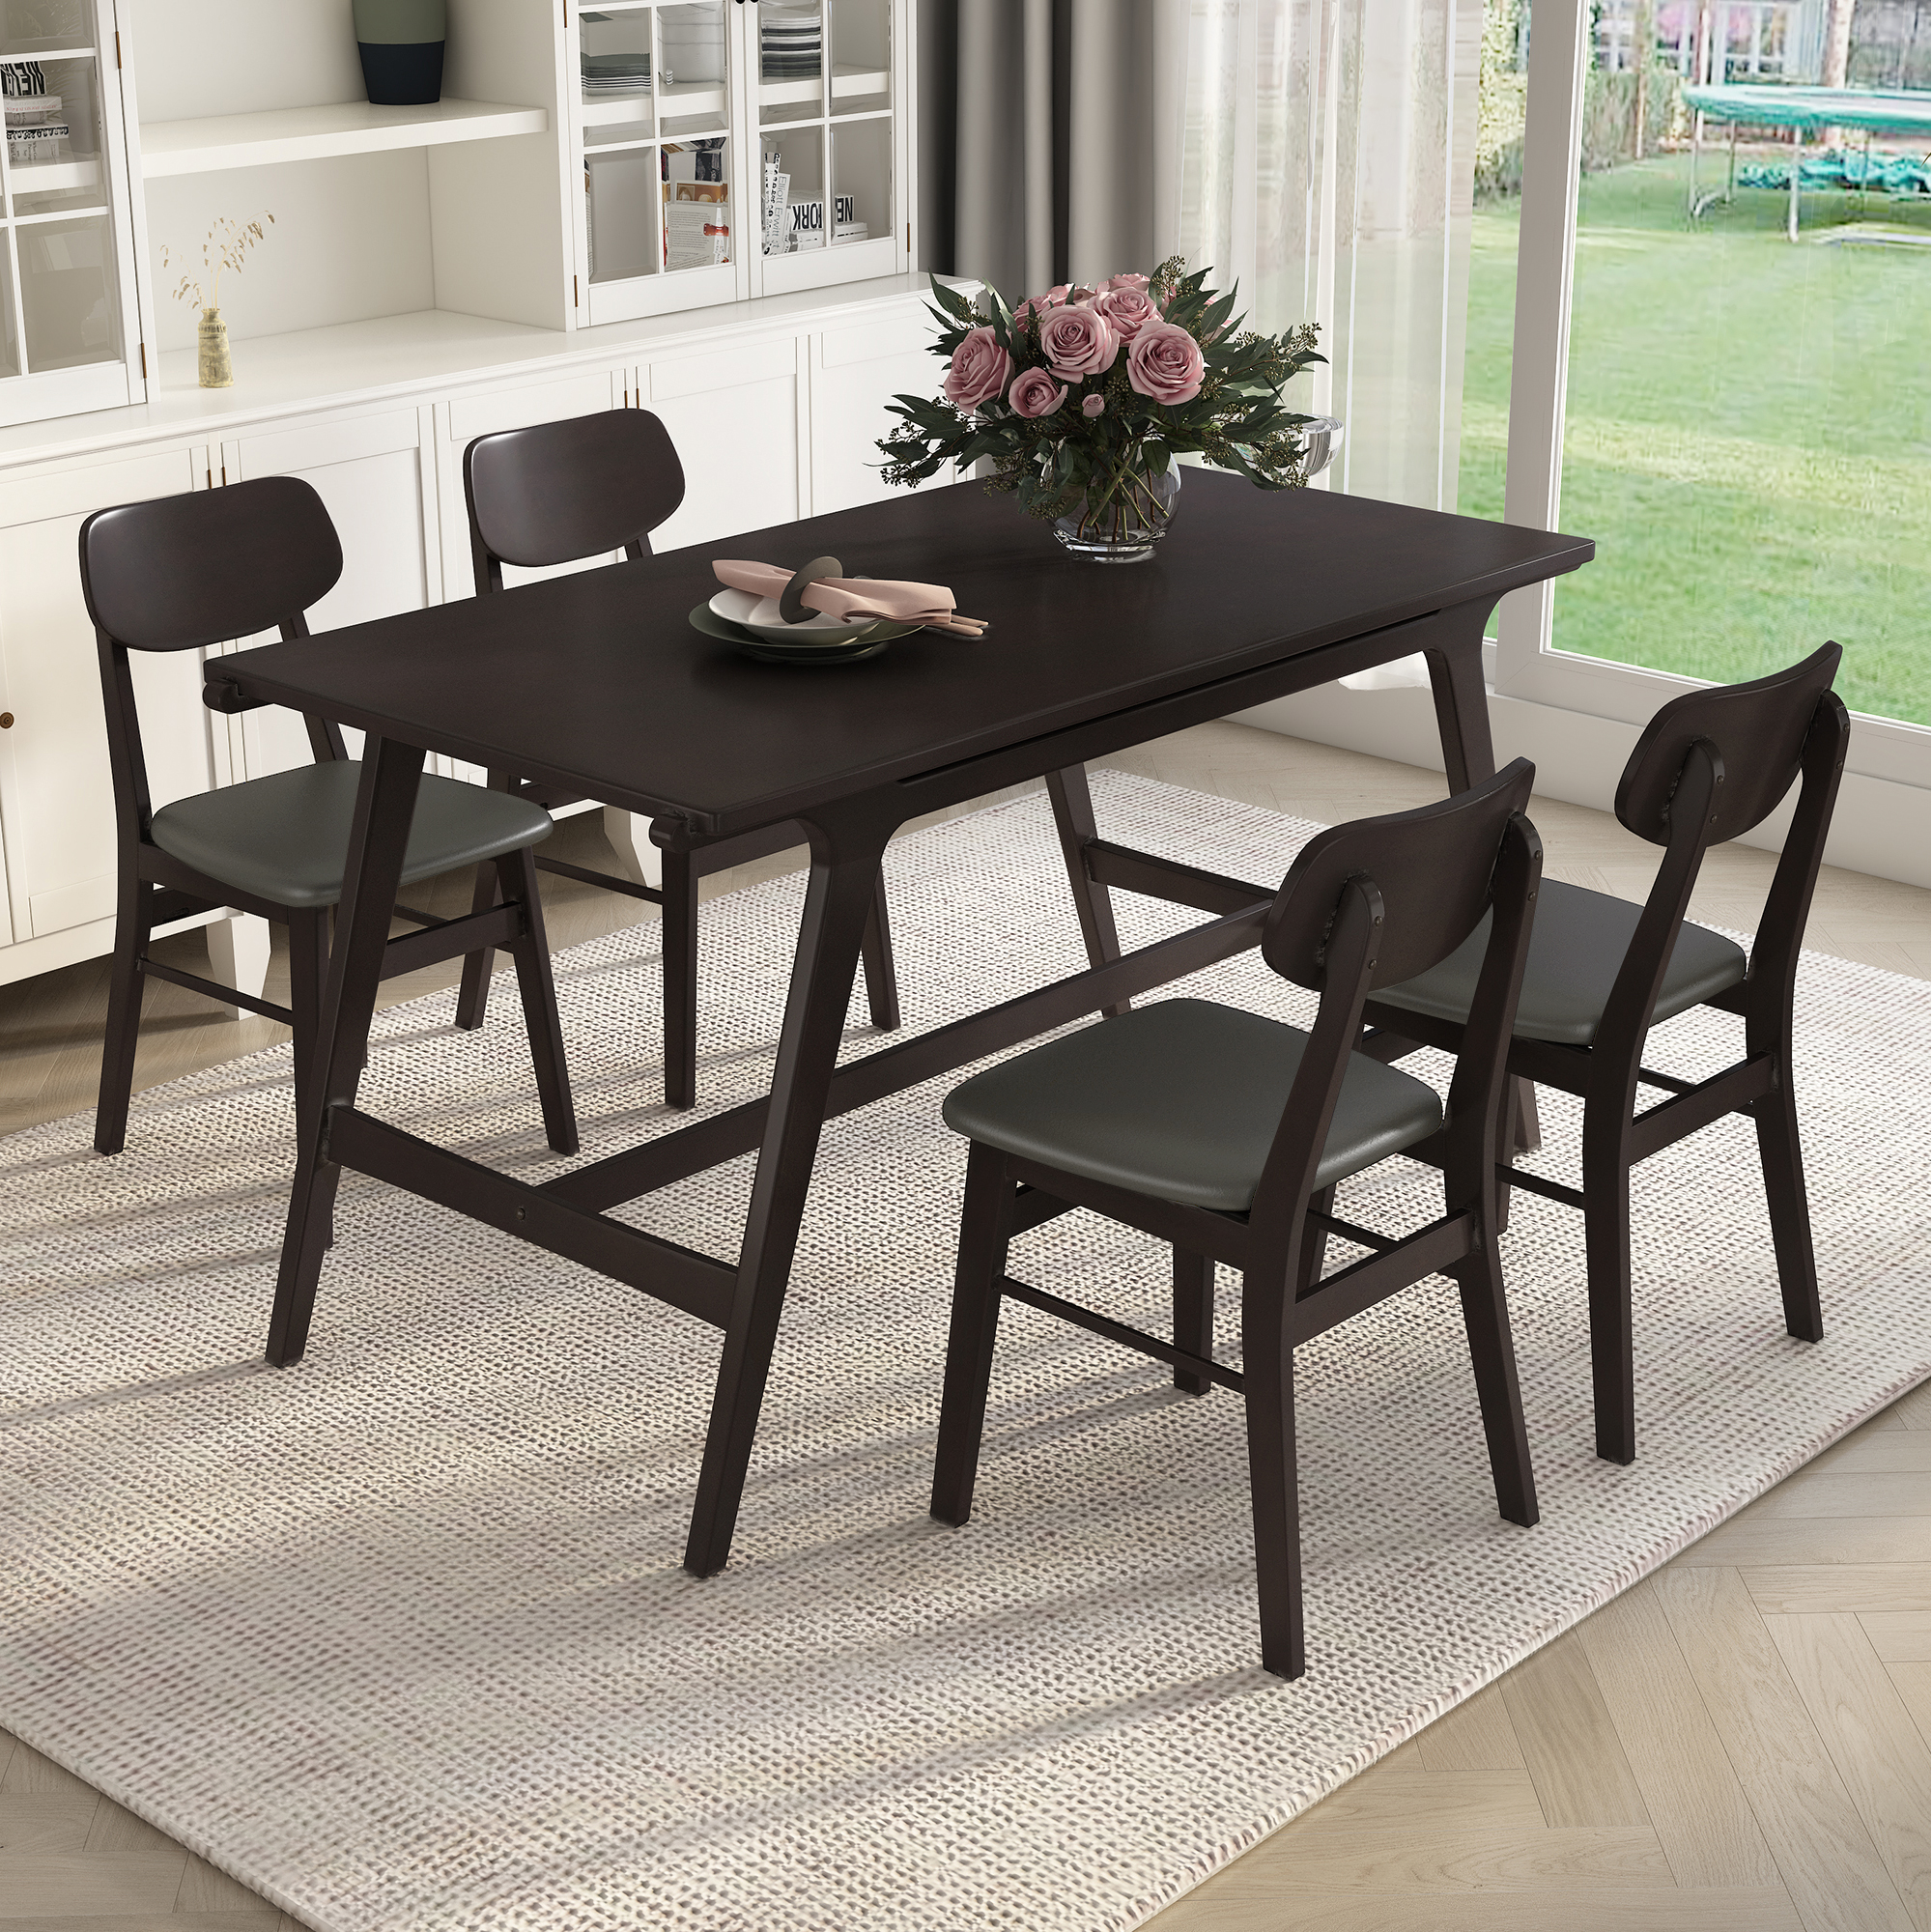 5-Piece Mid-Century Style Dining Table Set - ST000041AAP